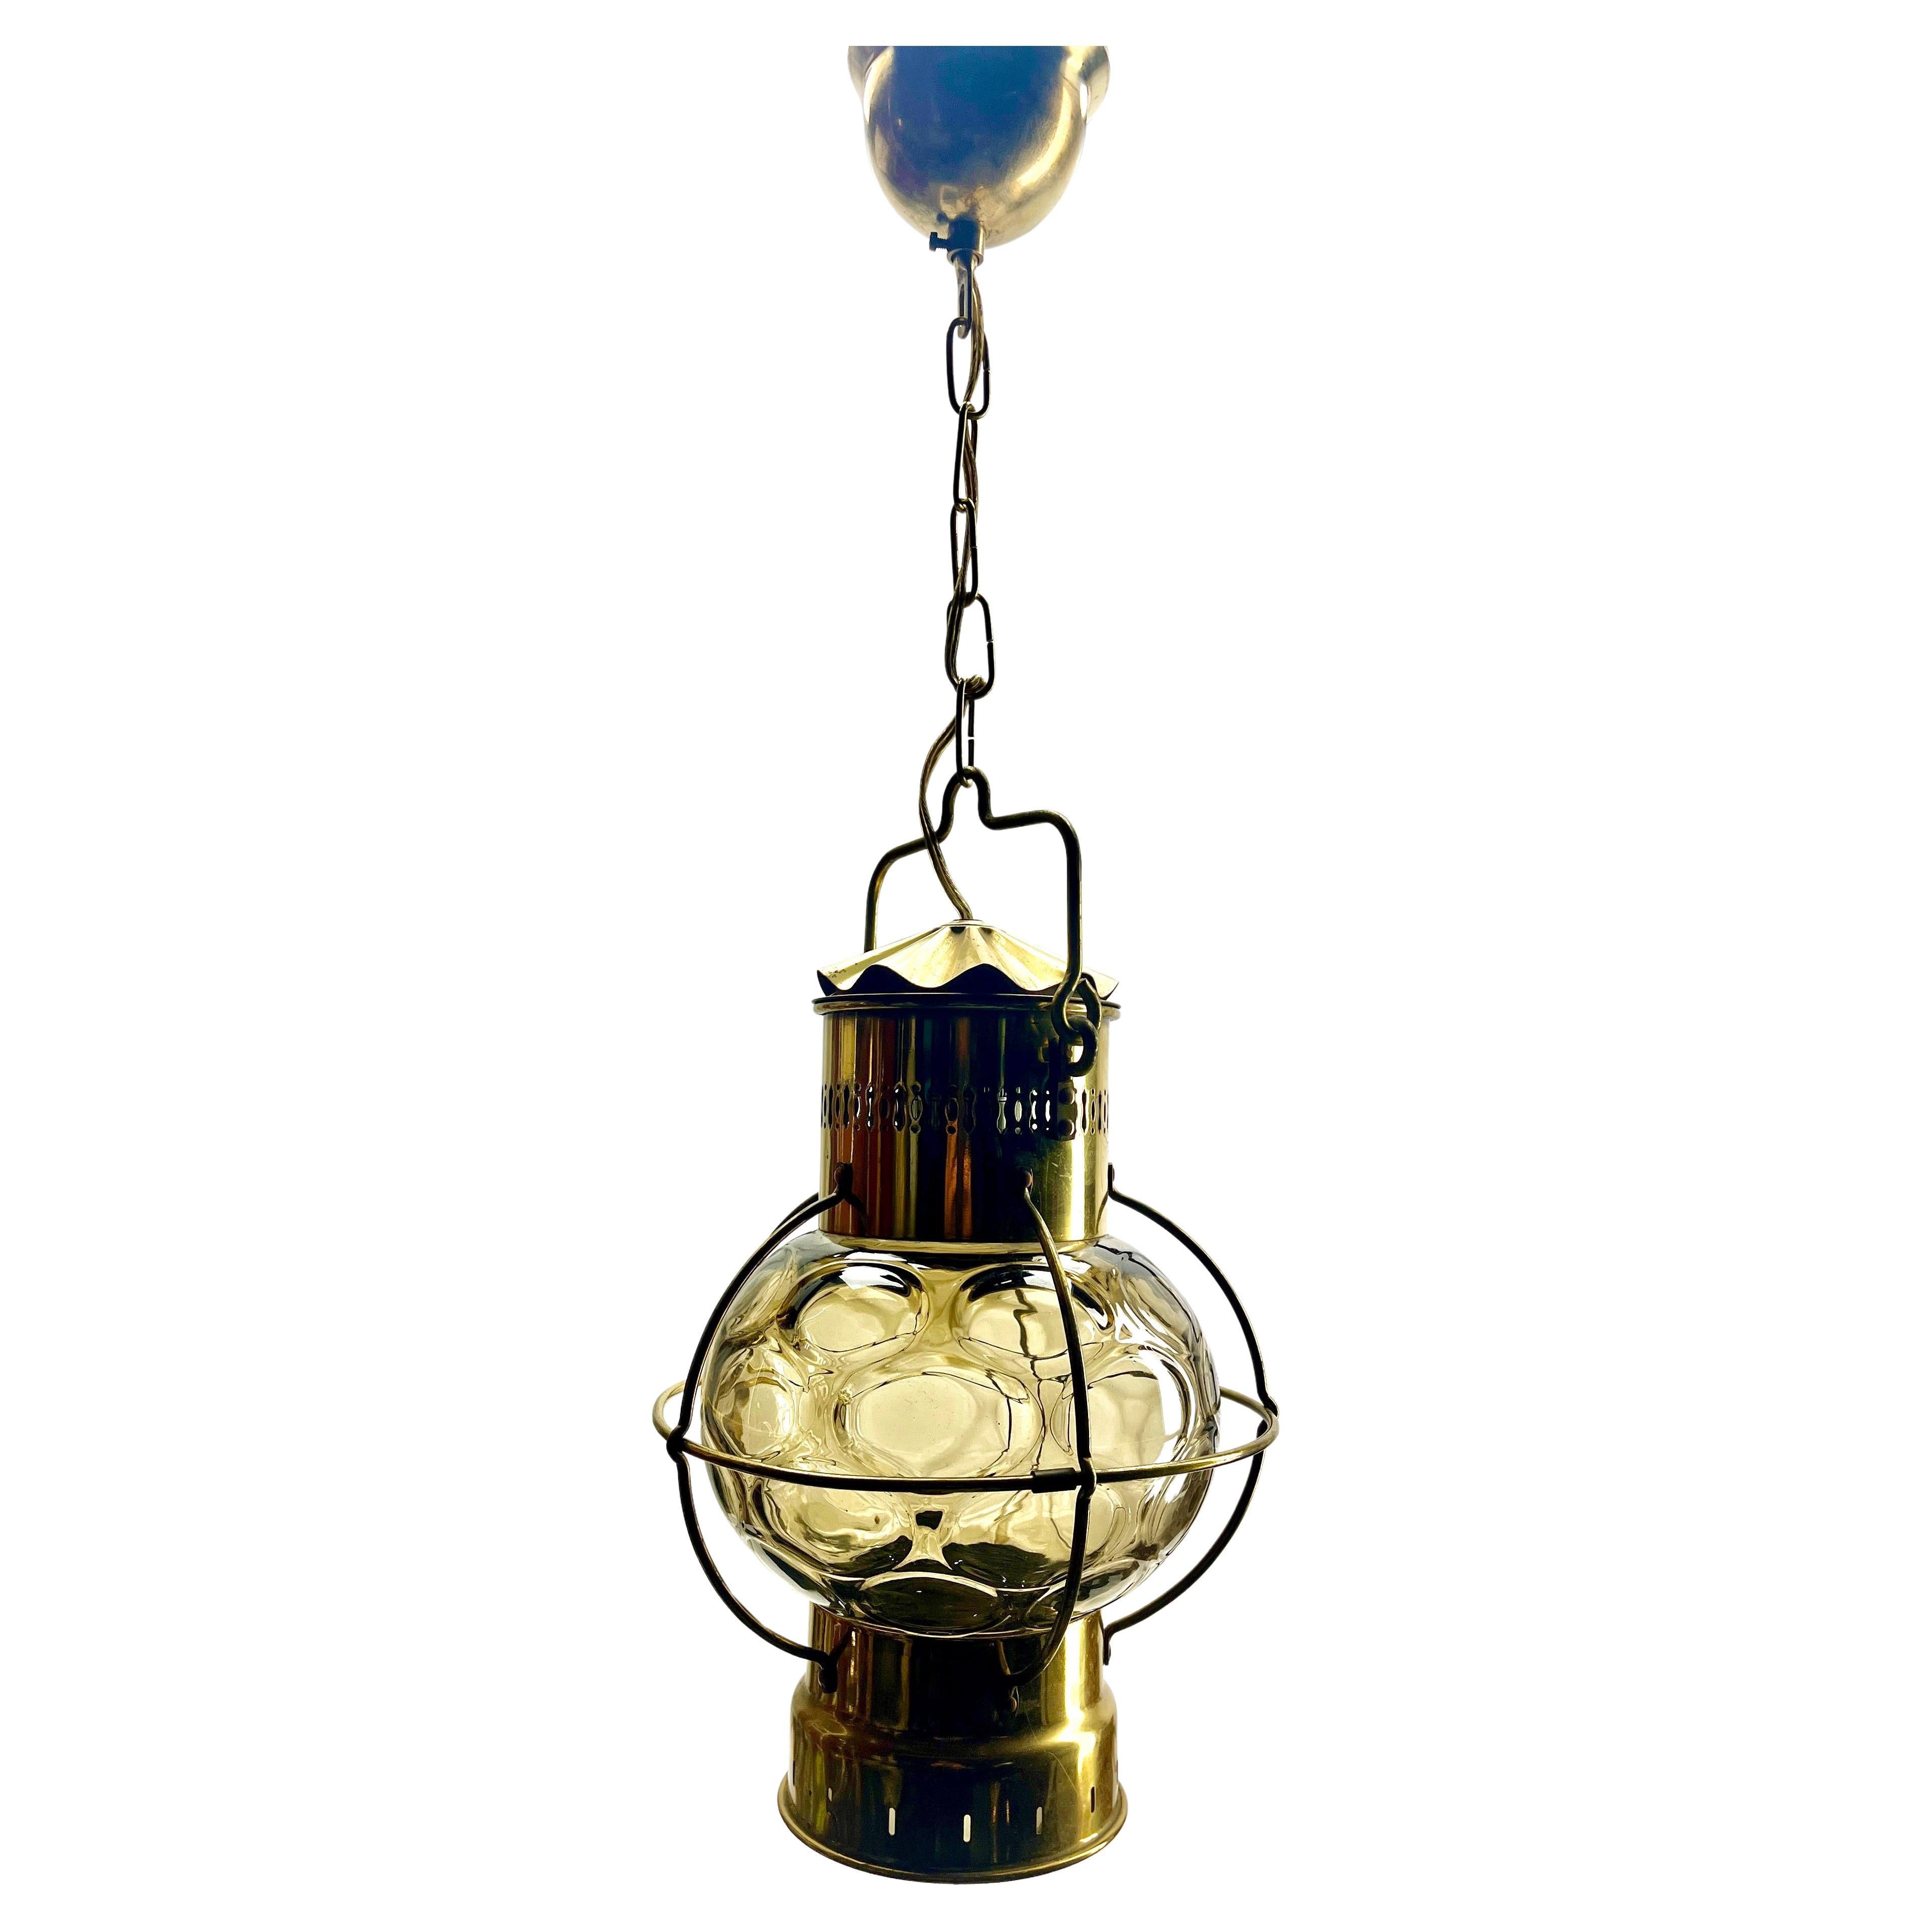 Style of Brenner Kosmos oil ships lamp
Antique Style of Kosmos Brenner oil converted to electric ceiling hanging lamp
Old oil lamp ship lamp Kosmos Brenner

As service: We can adjust the lamp Height for you in advance if needed. 
Chain 18 cm Fiing